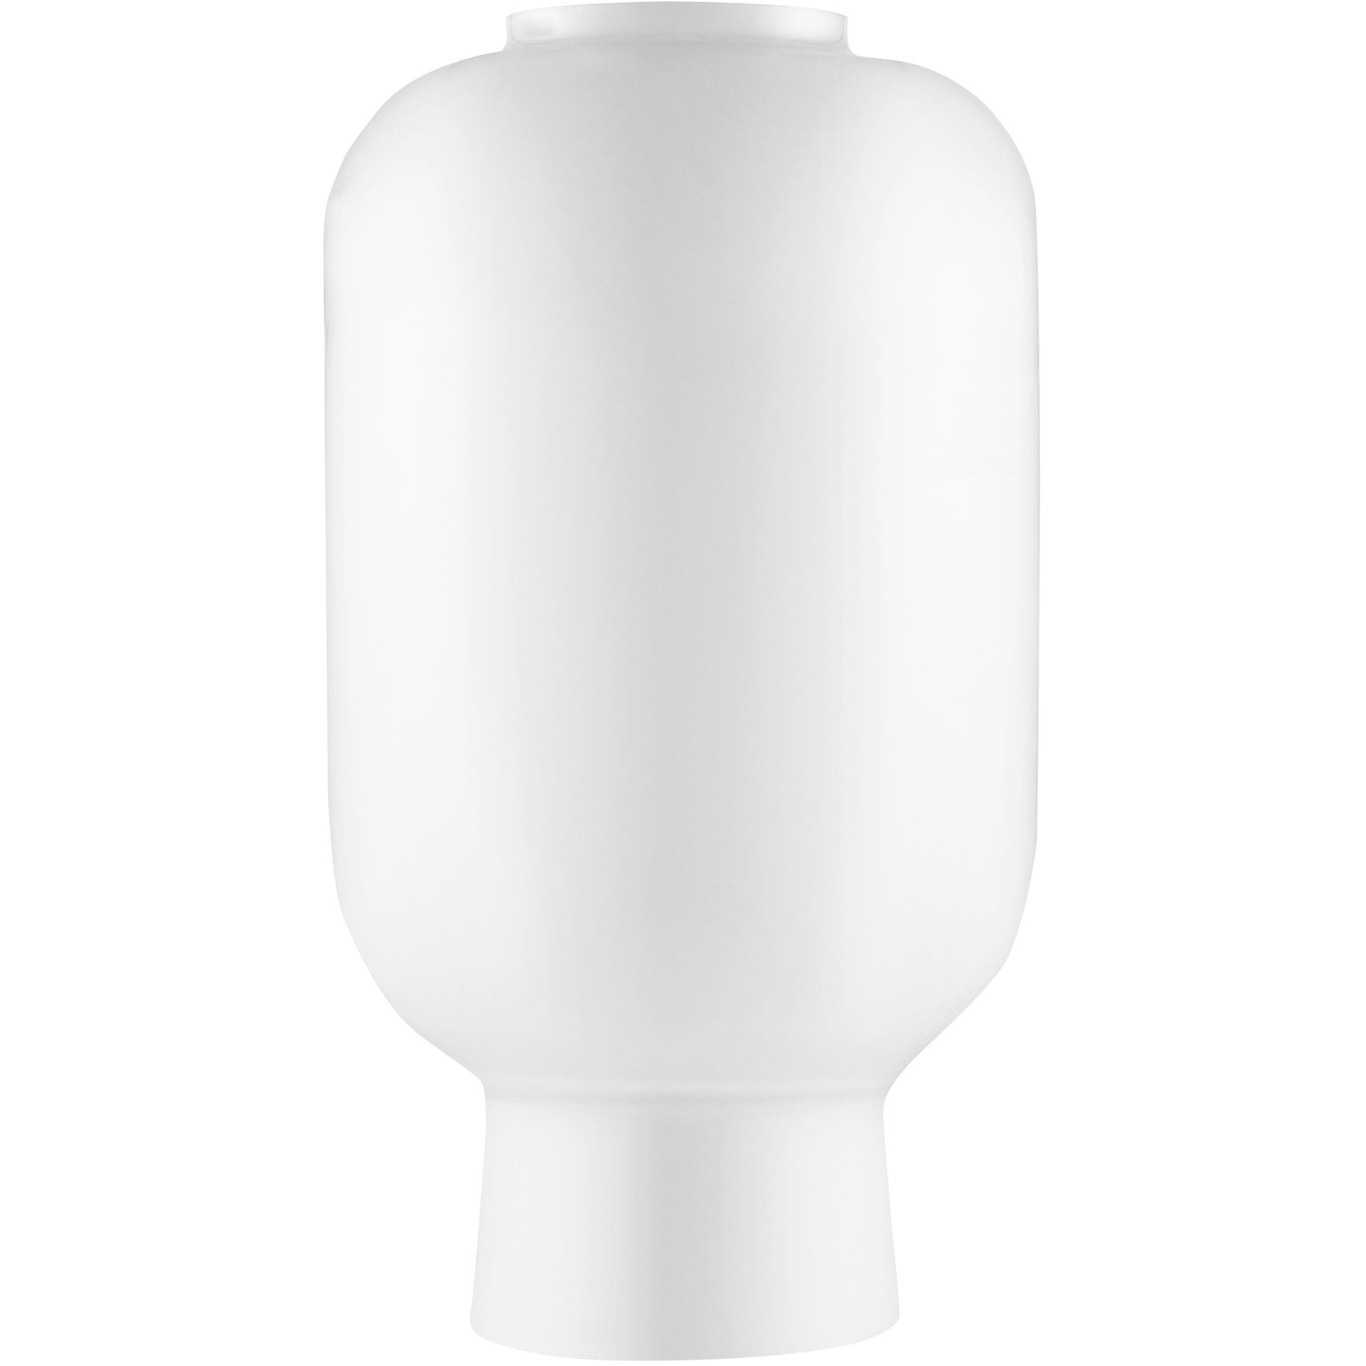 Amp Lampshade For Chandelier, White